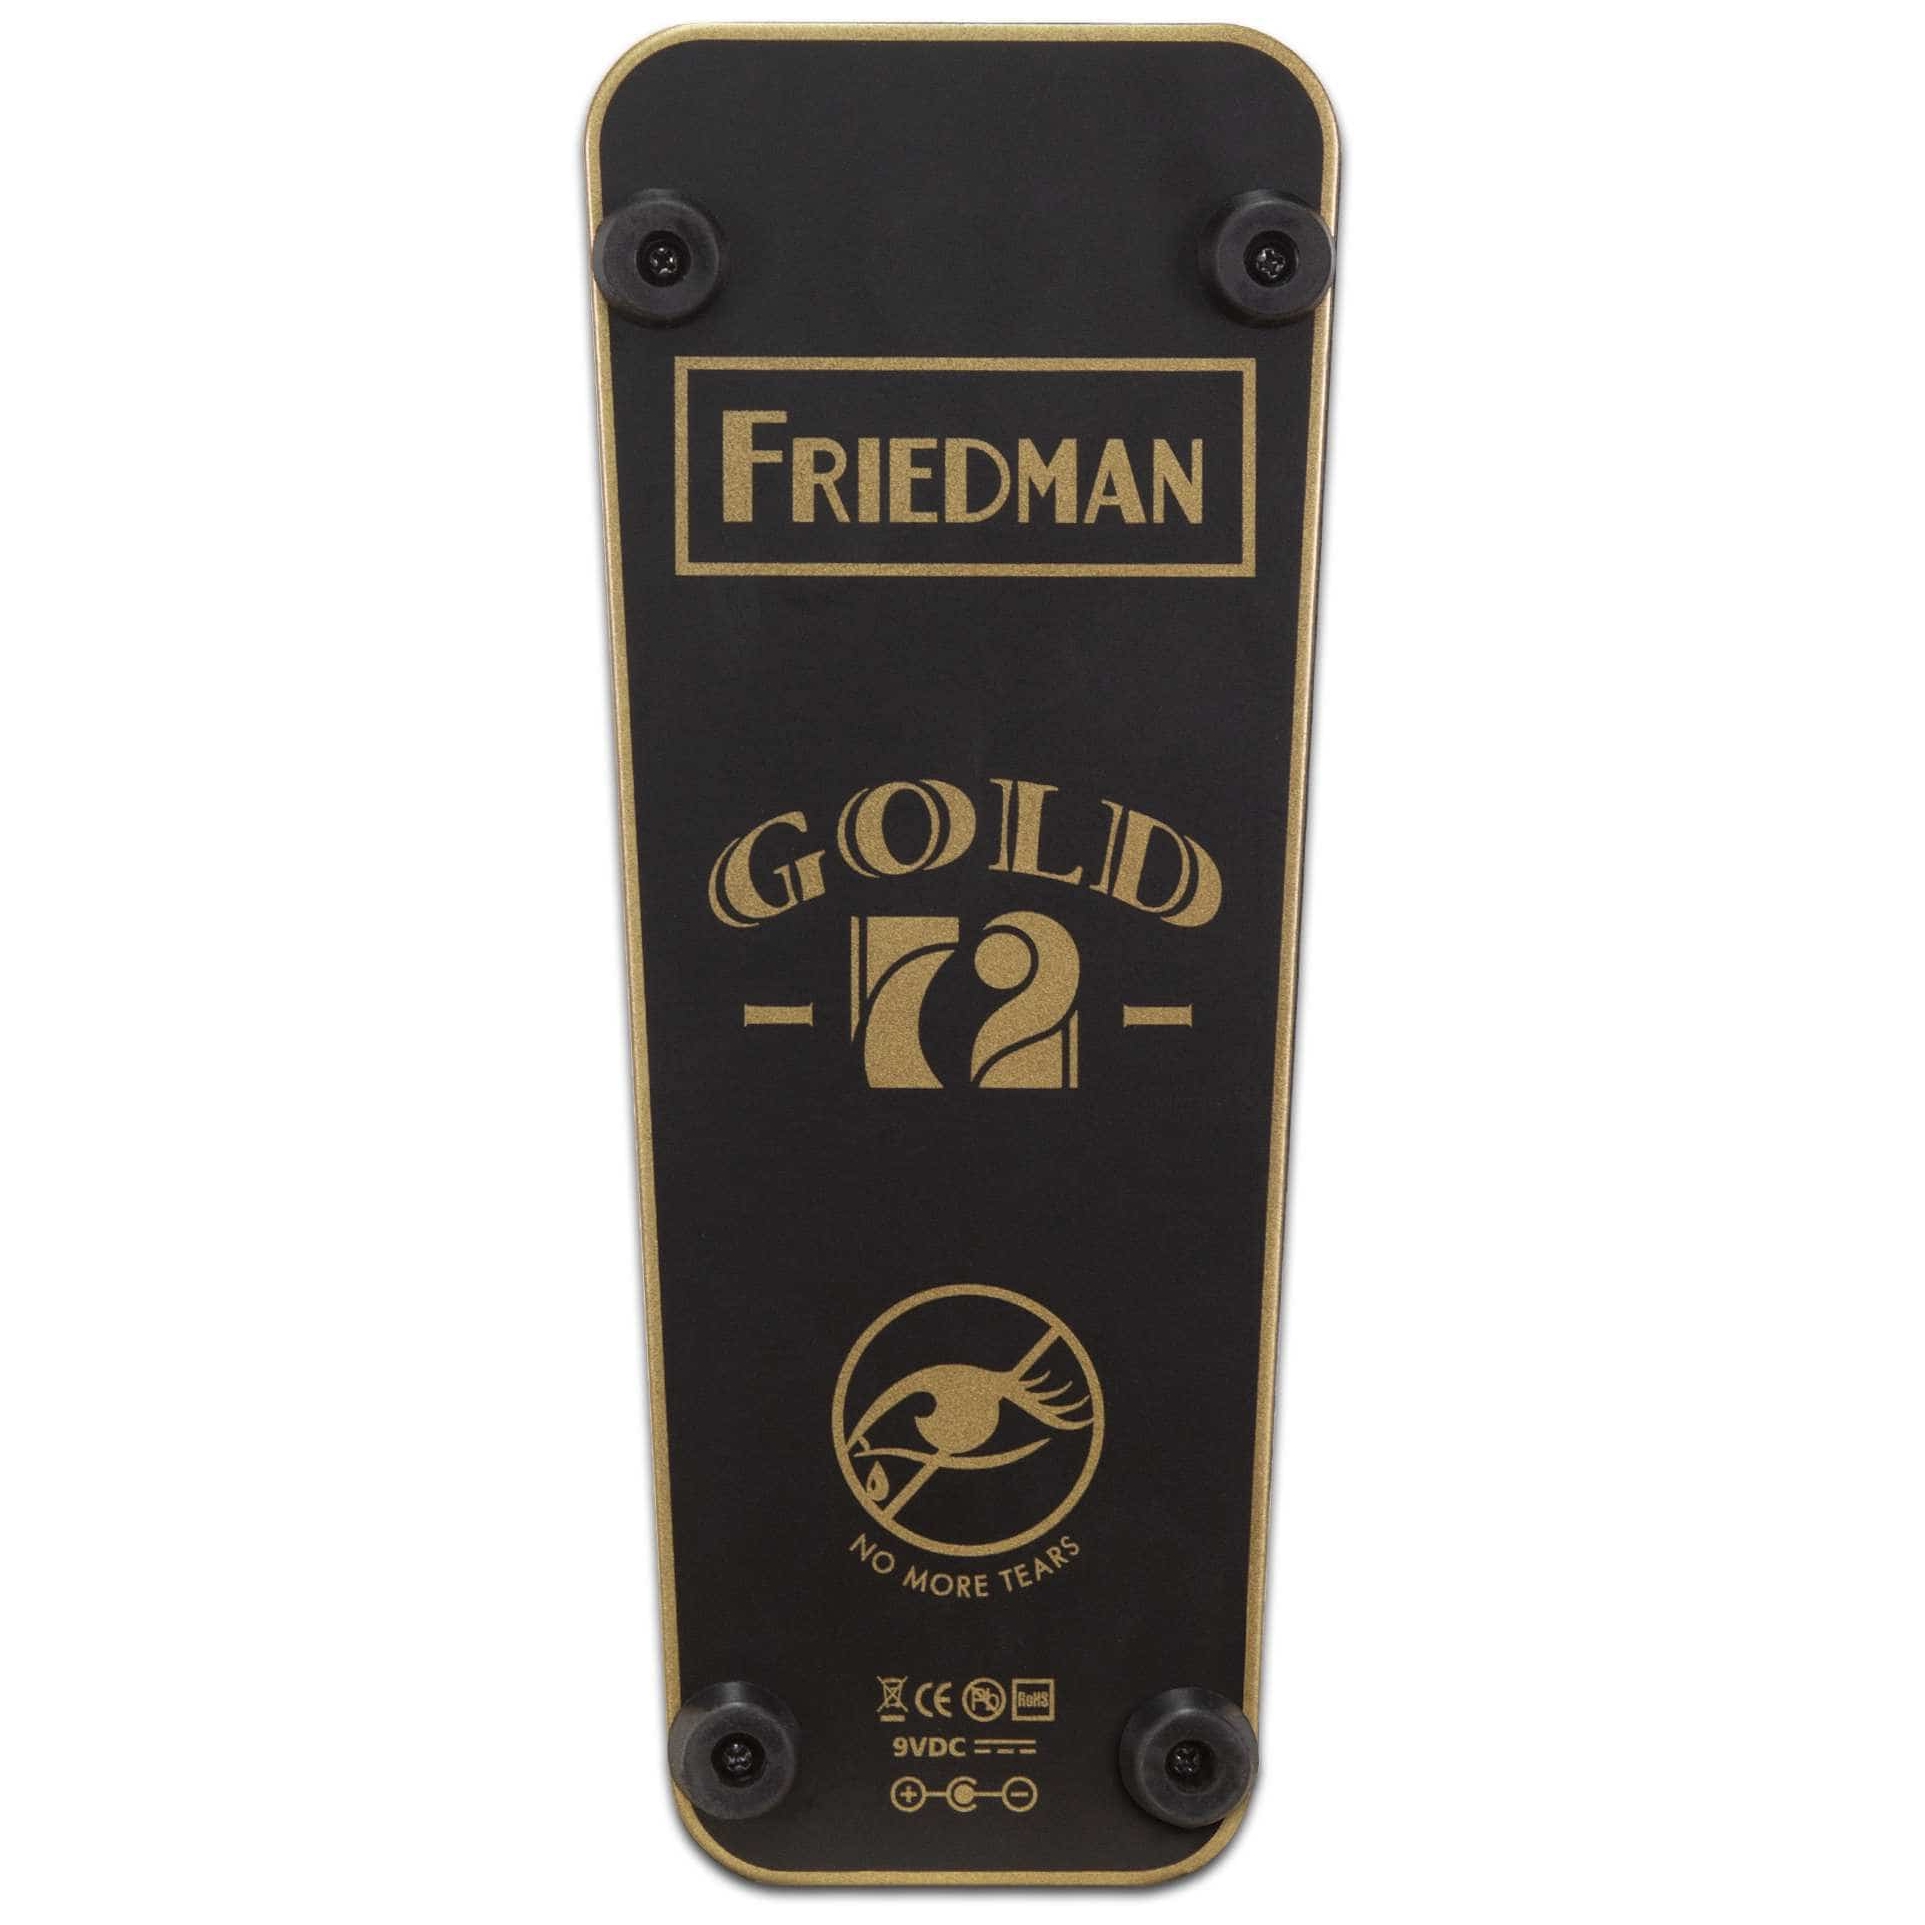 Friedman Amplification No More Tears Gold 72 Wah Pedal